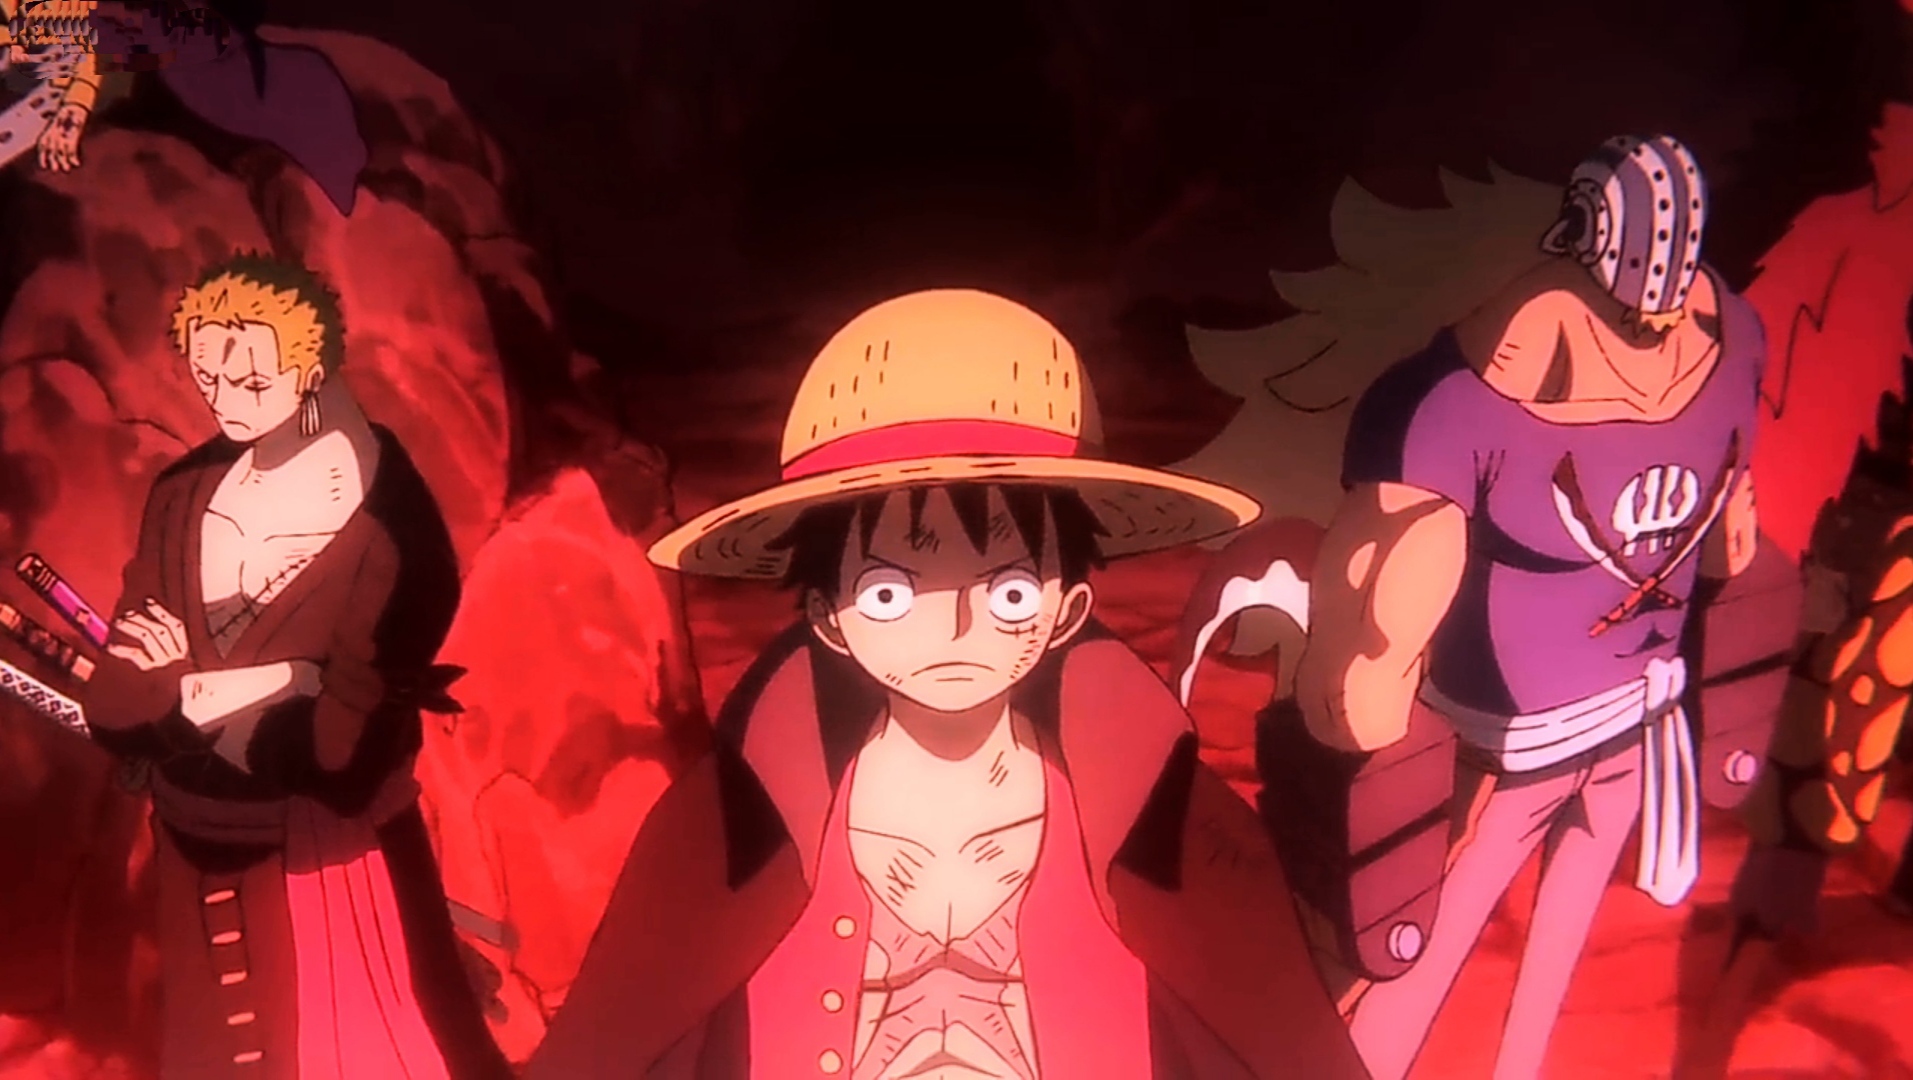 A History of One Piece's Best Director, Megumi Ishitani